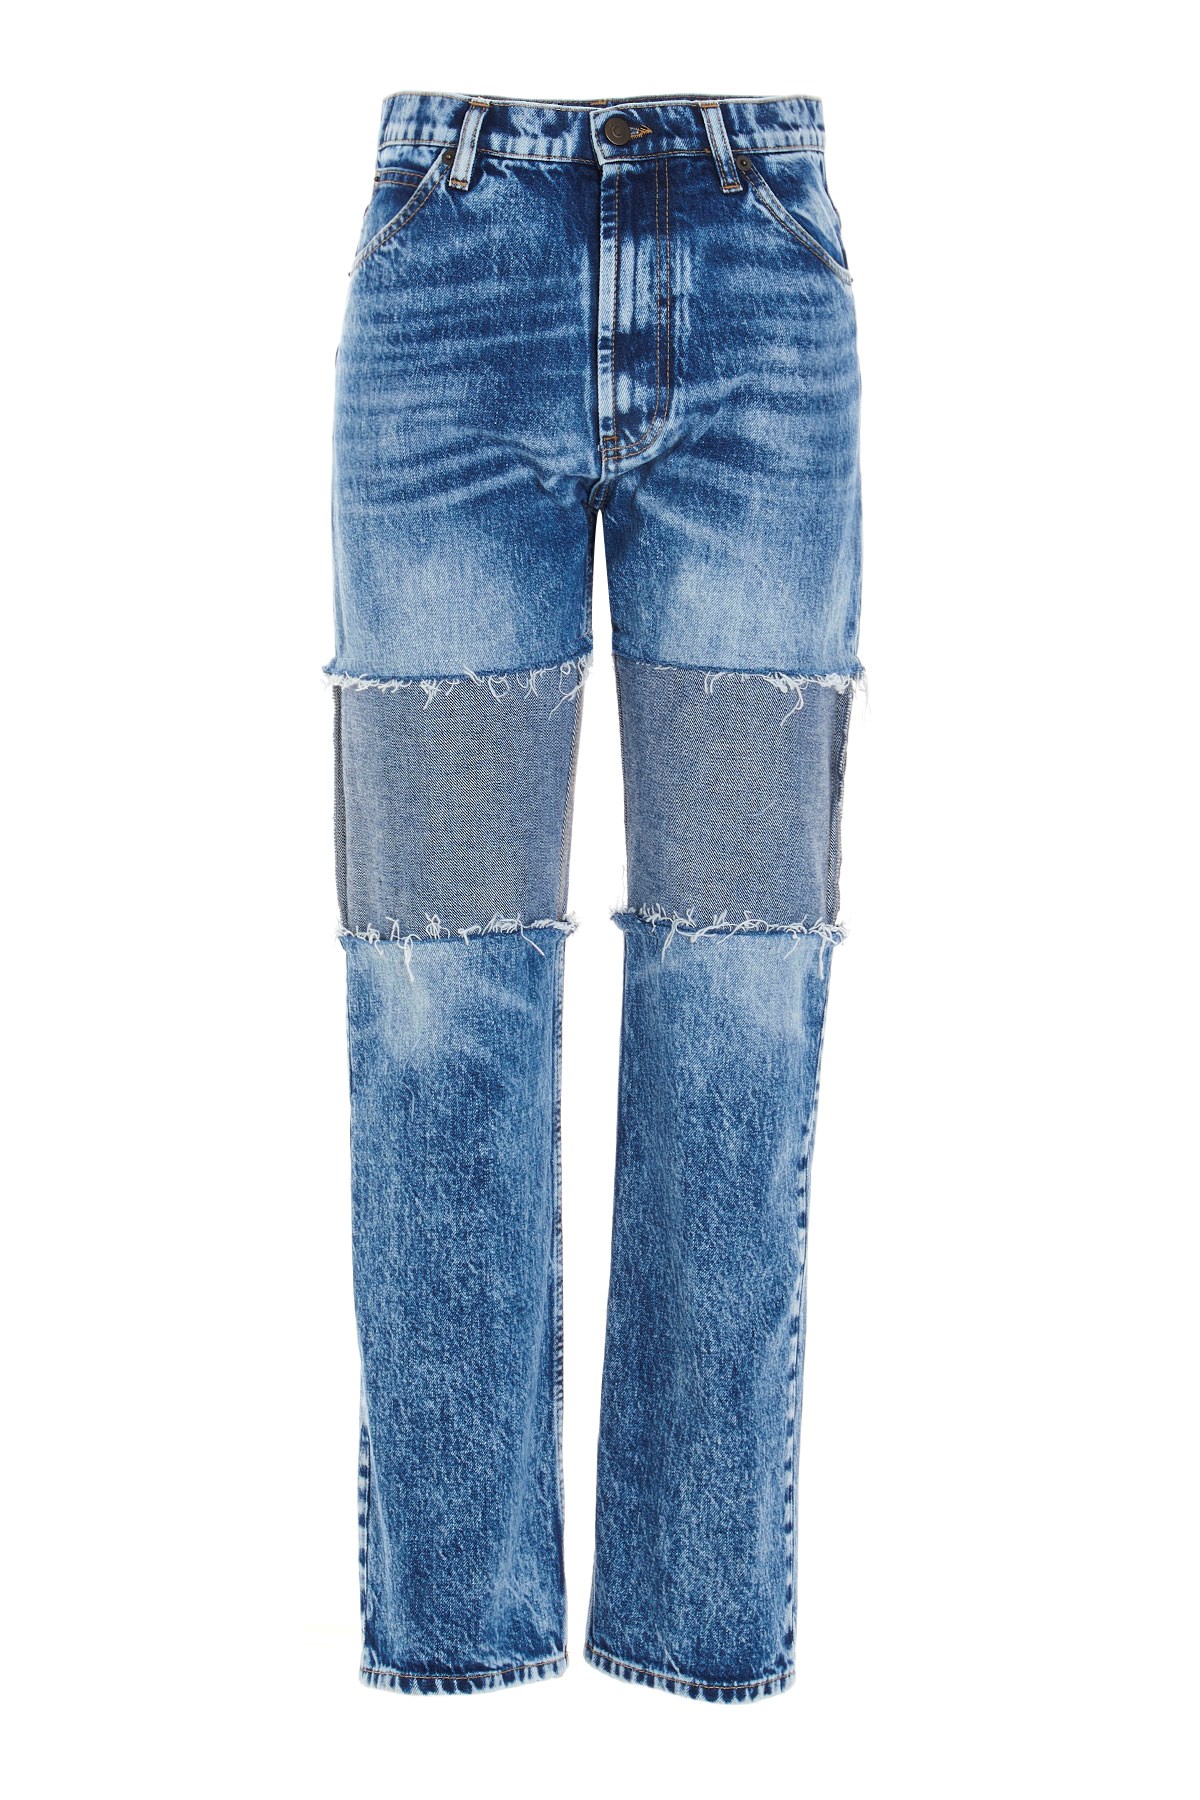 MAISON MARGIELA Jeans 'Recycled Patchwork'